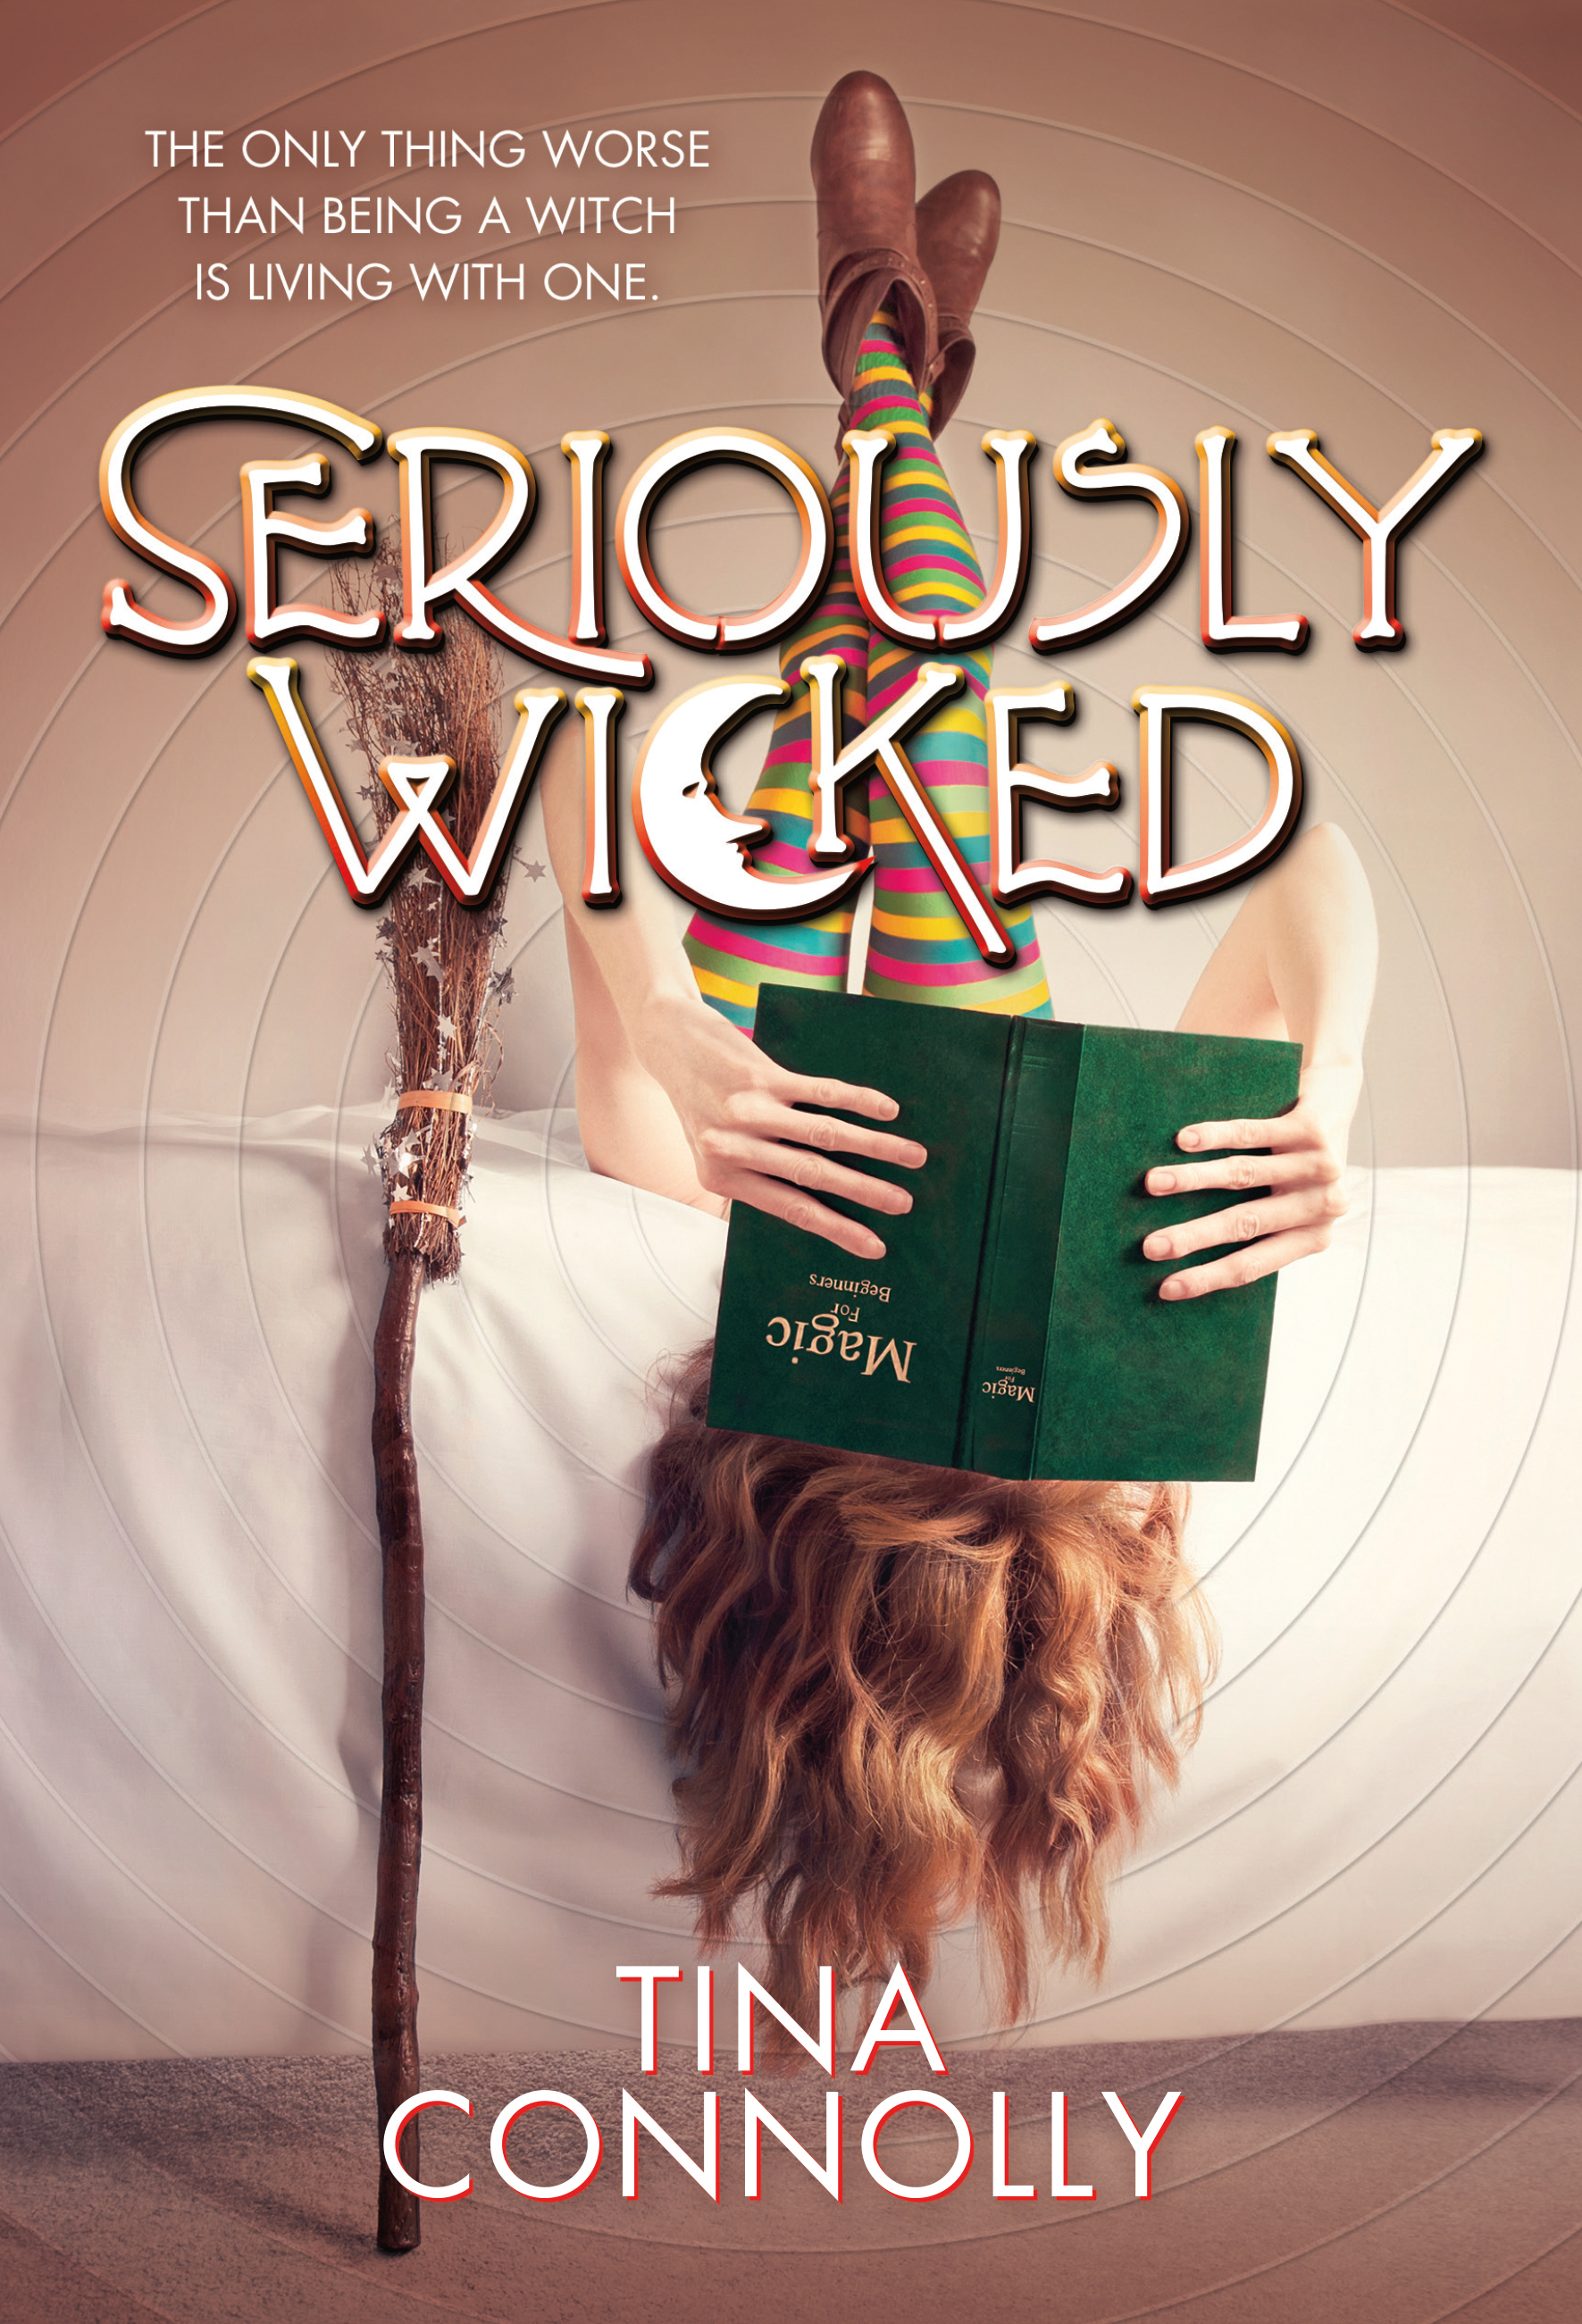 Seriously Wicked : A Novel by Tina Connolly